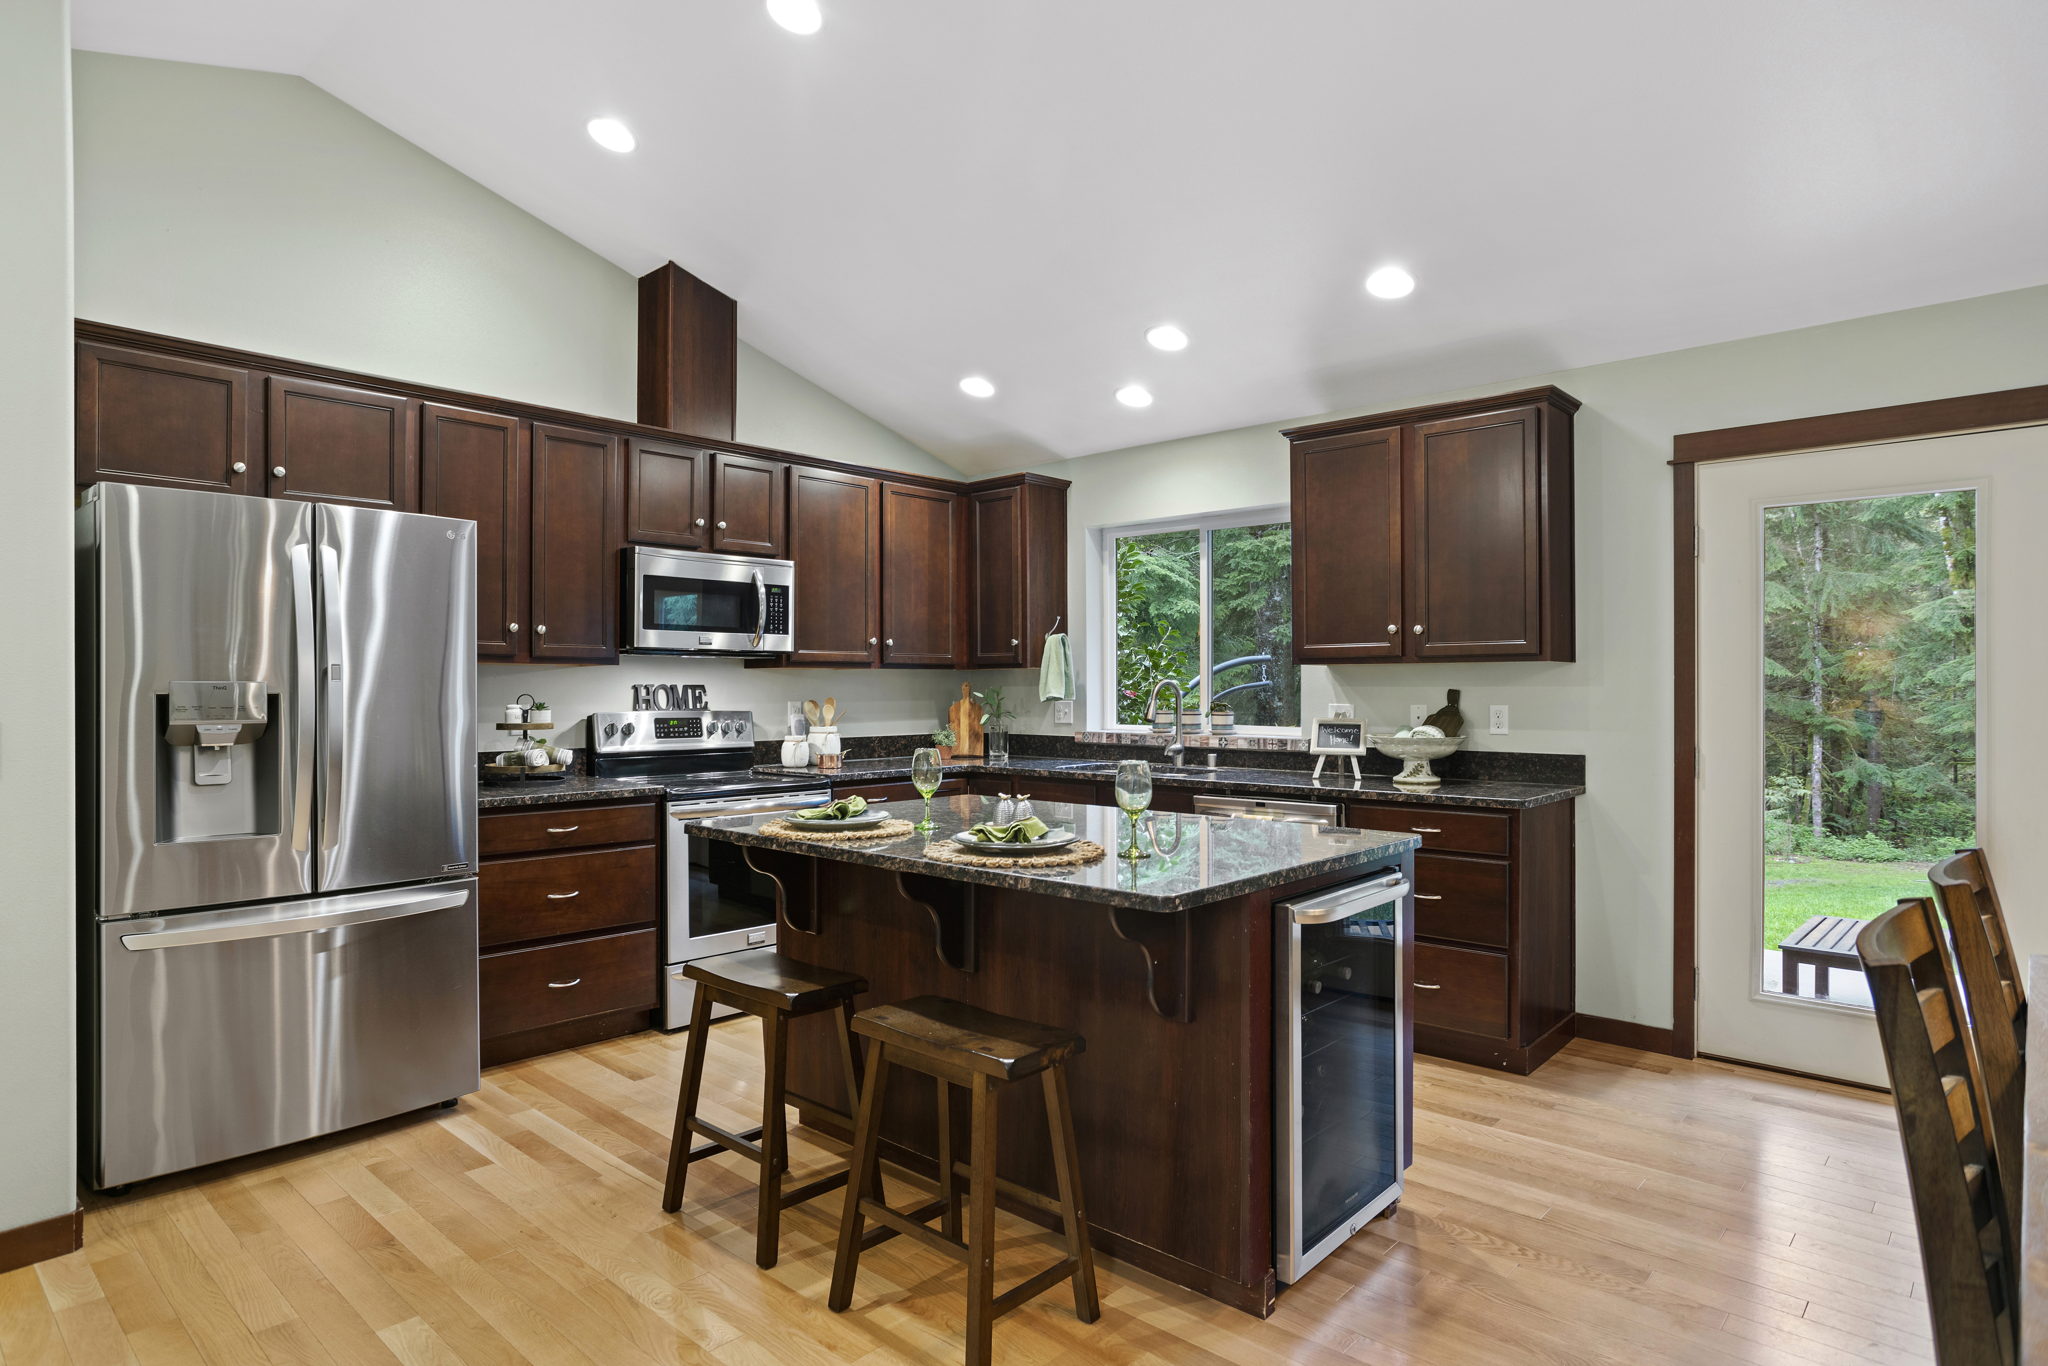 Stainless Steel appliances, gorgeous dark wood cabinetry, bar seating and built in wine fridge make this a Chefs dream kitchen!